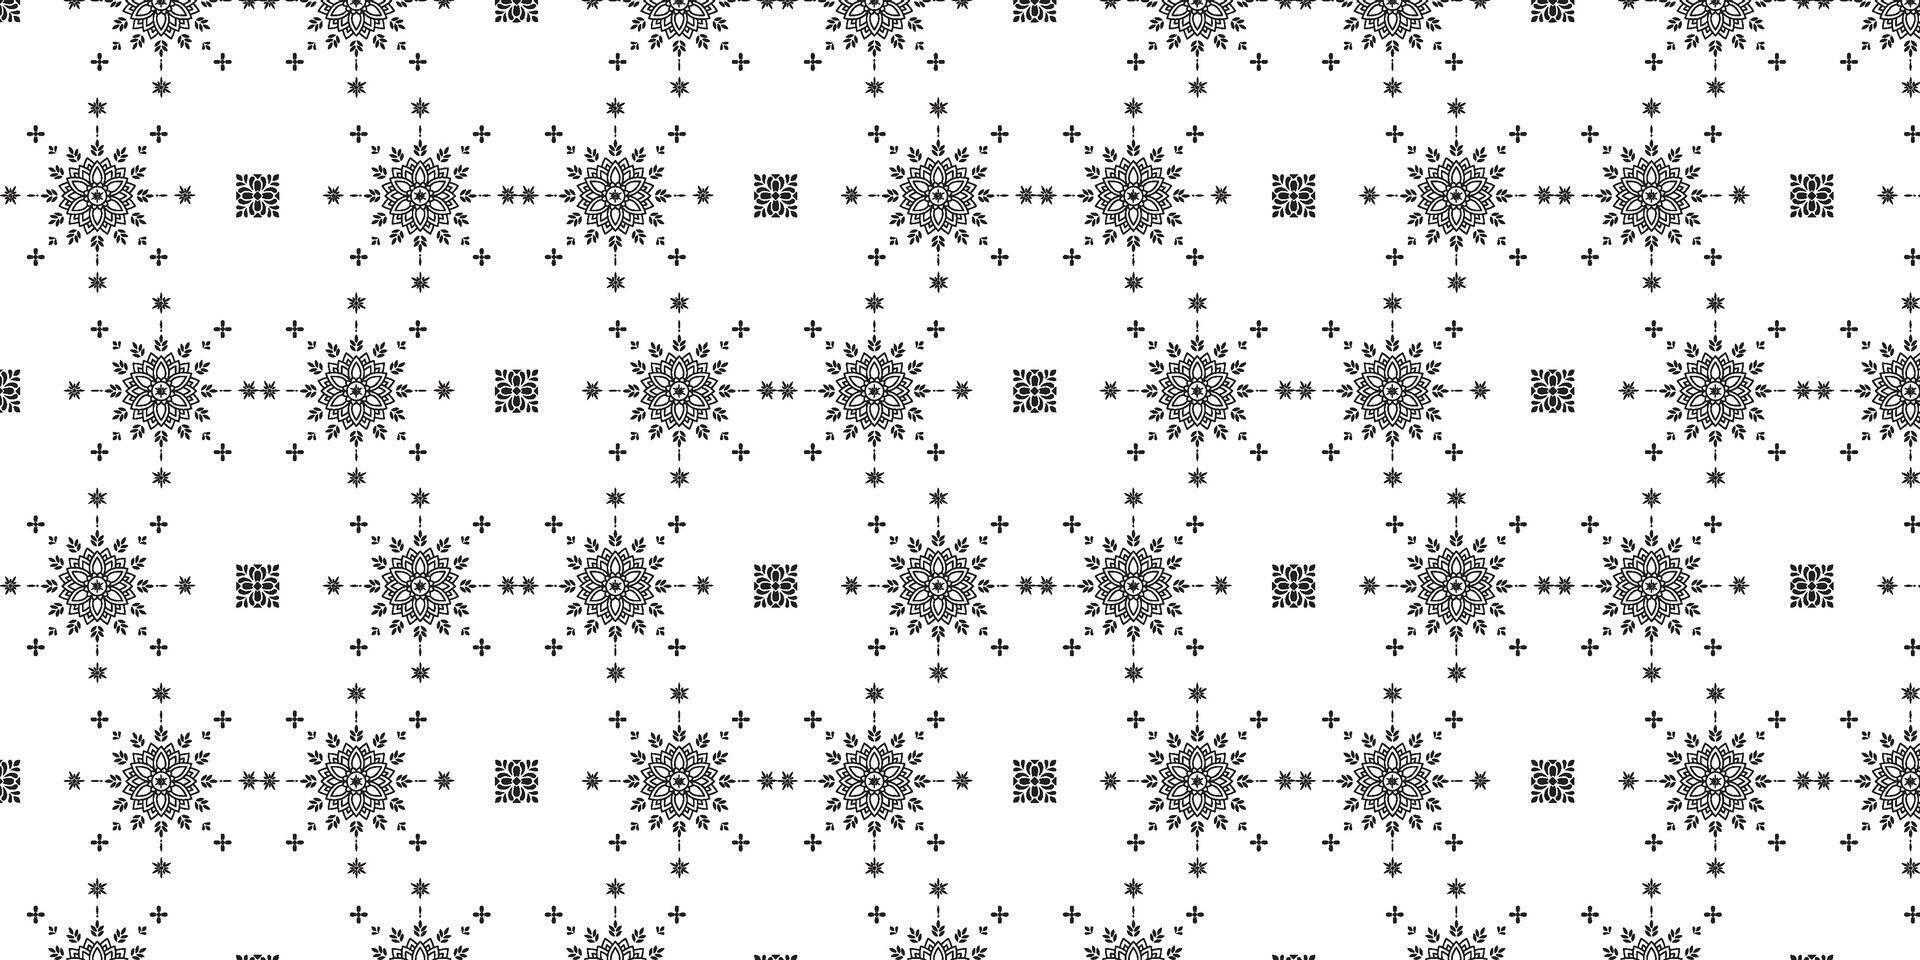 Seamless illustration pattern in ornamental style vector